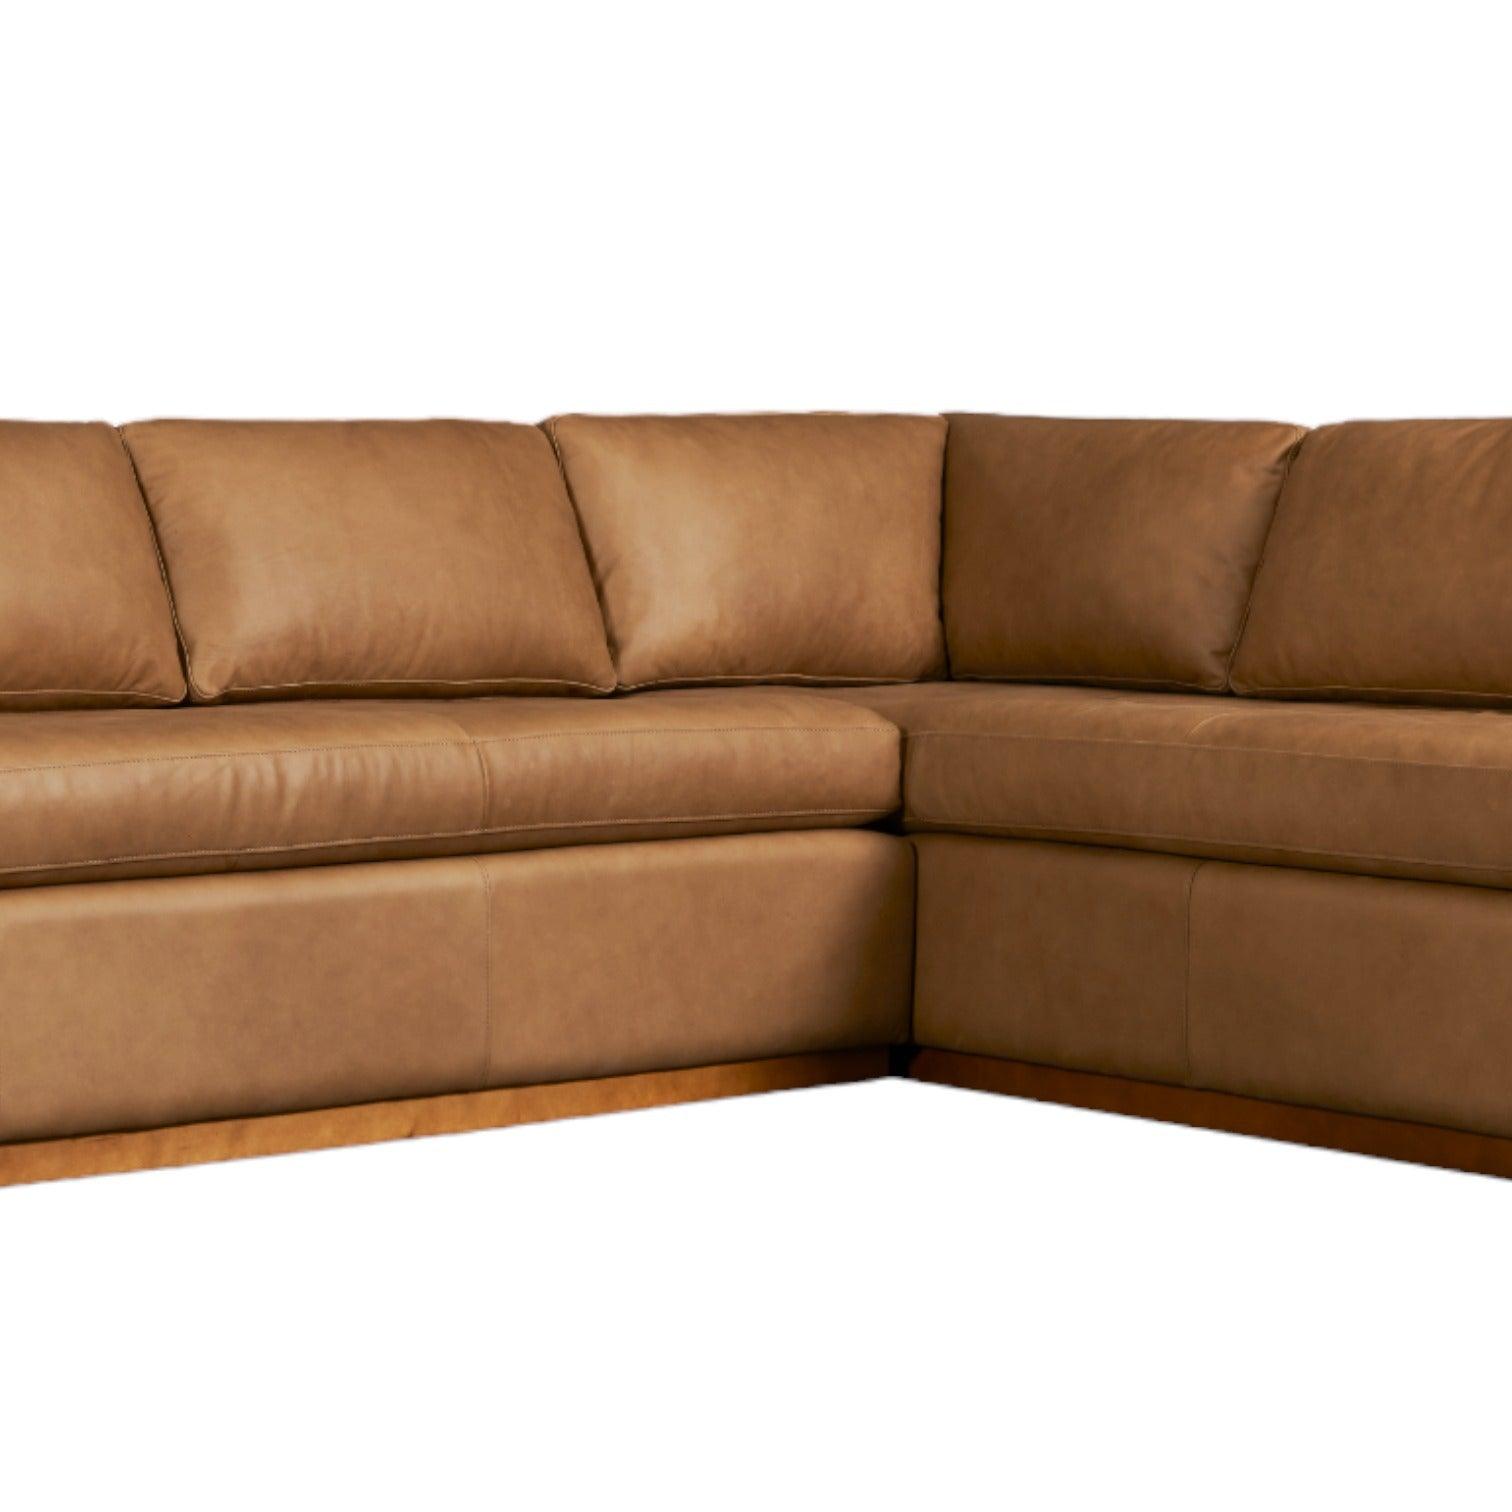 Goldenrod Nubuck Leather Sectional With Chaise Made to Order - Uptown Sebastian